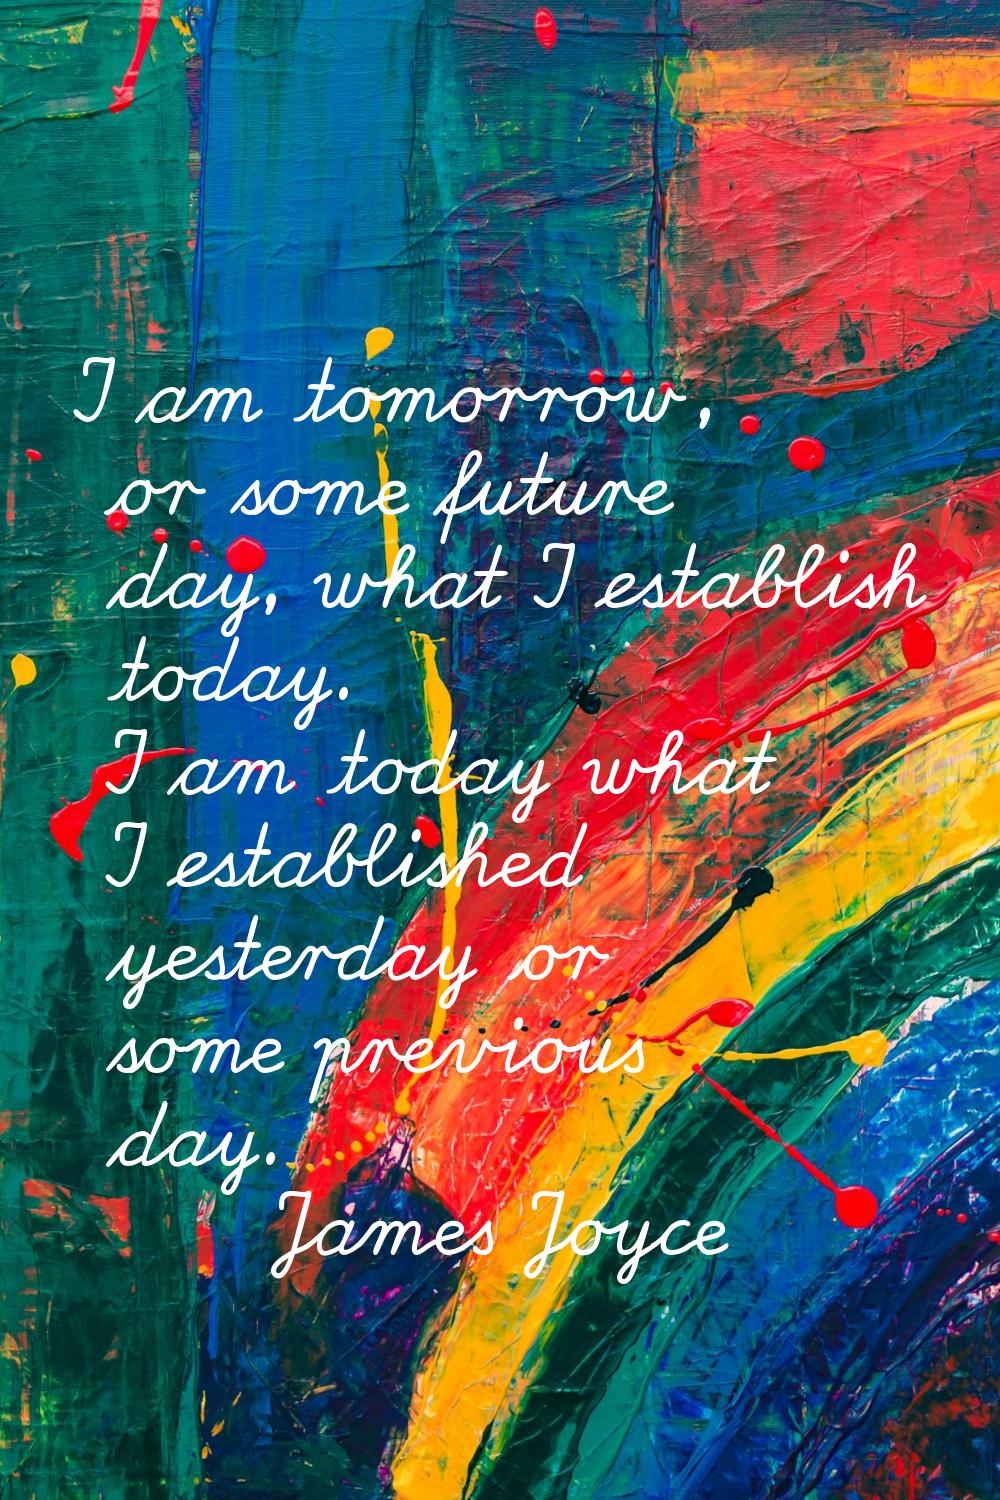 I am tomorrow, or some future day, what I establish today. I am today what I established yesterday 